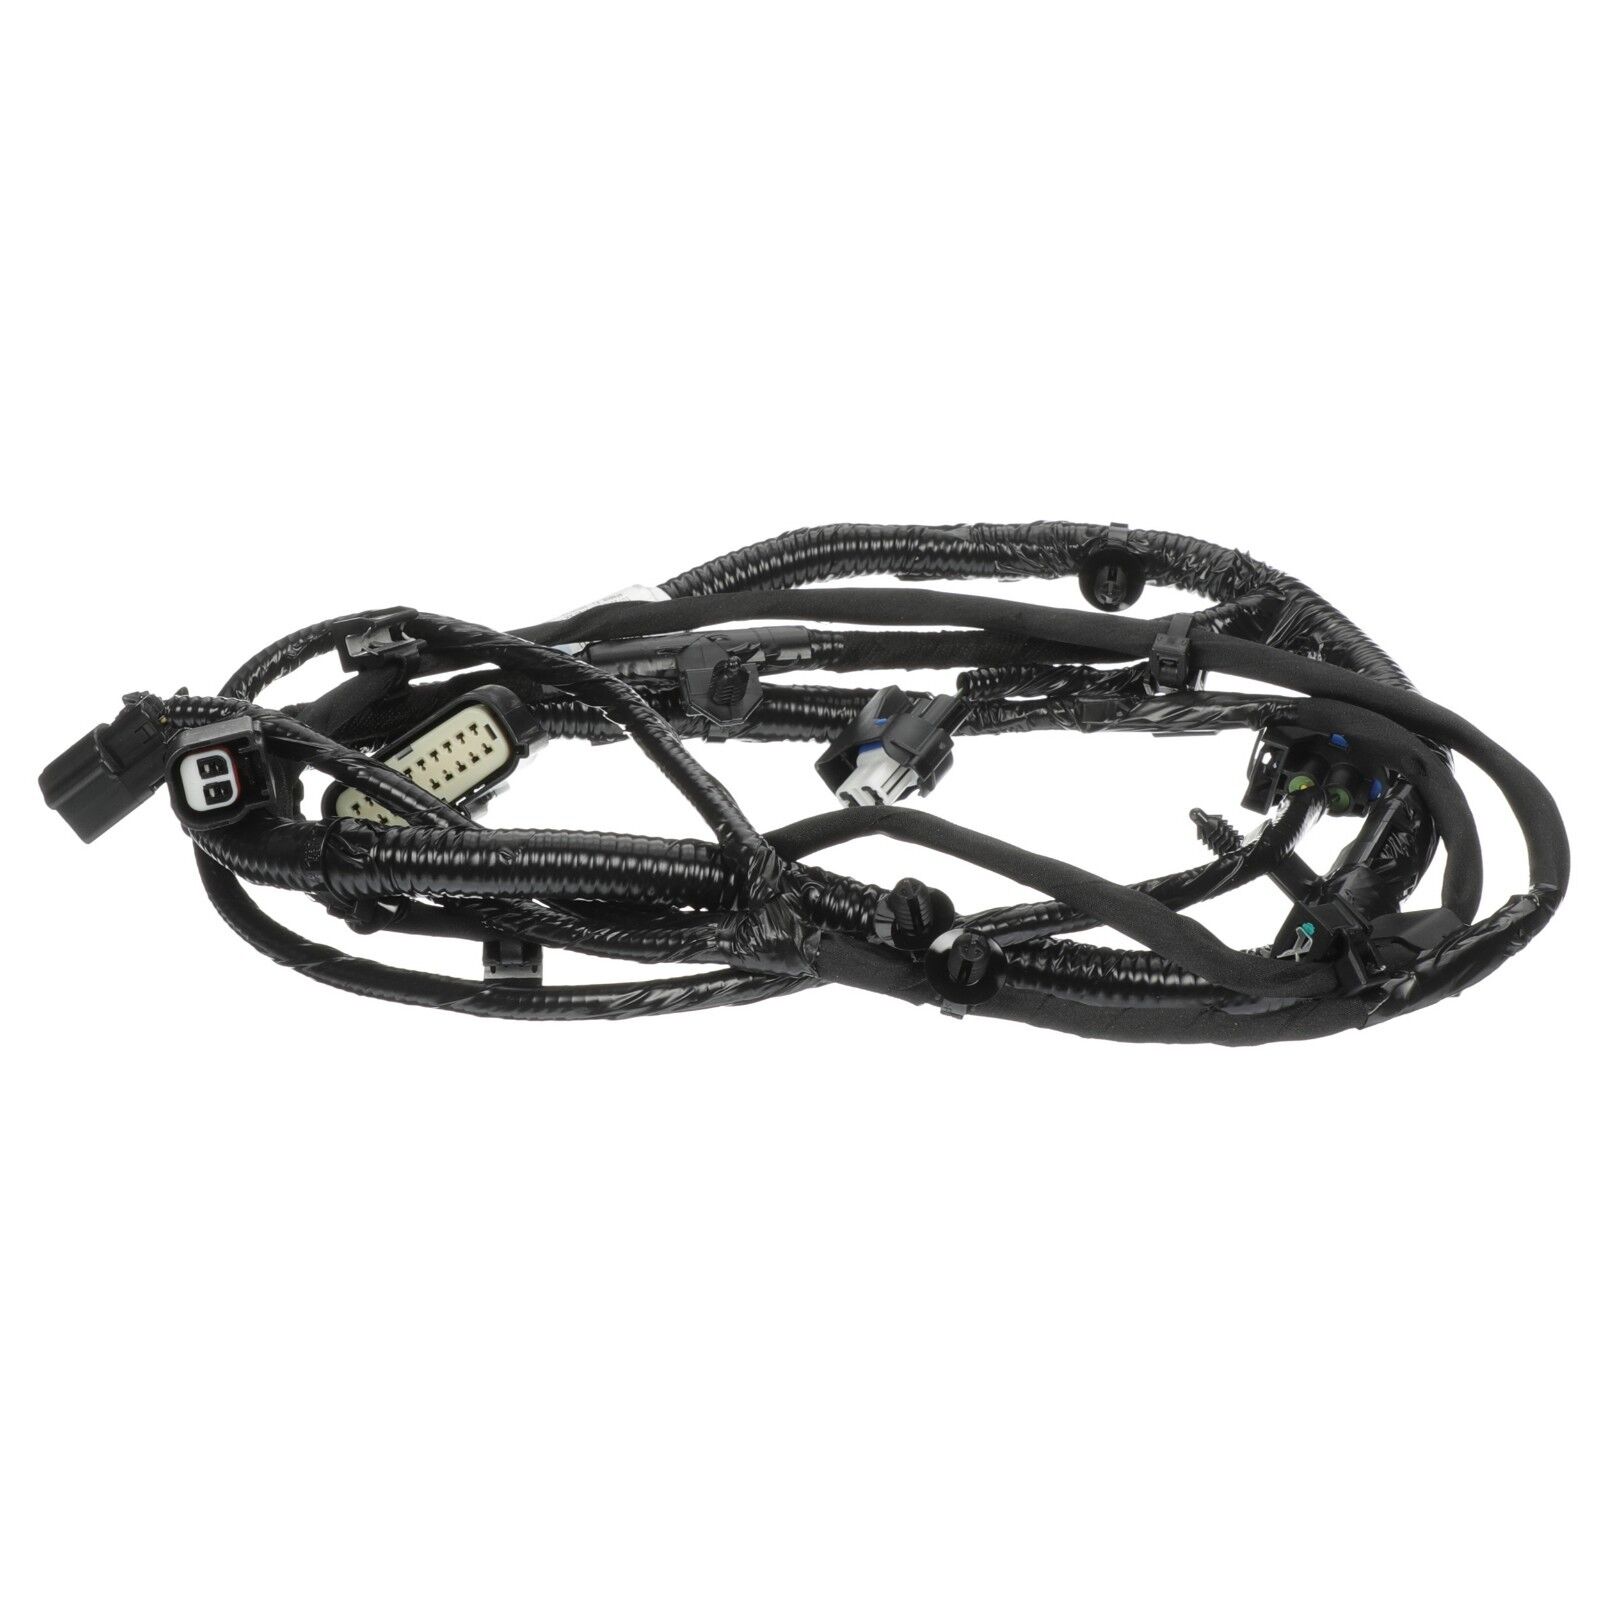 2013-2016 Ford Fusion Parking Fog Light Distance Control Wire Harness OEM NEW